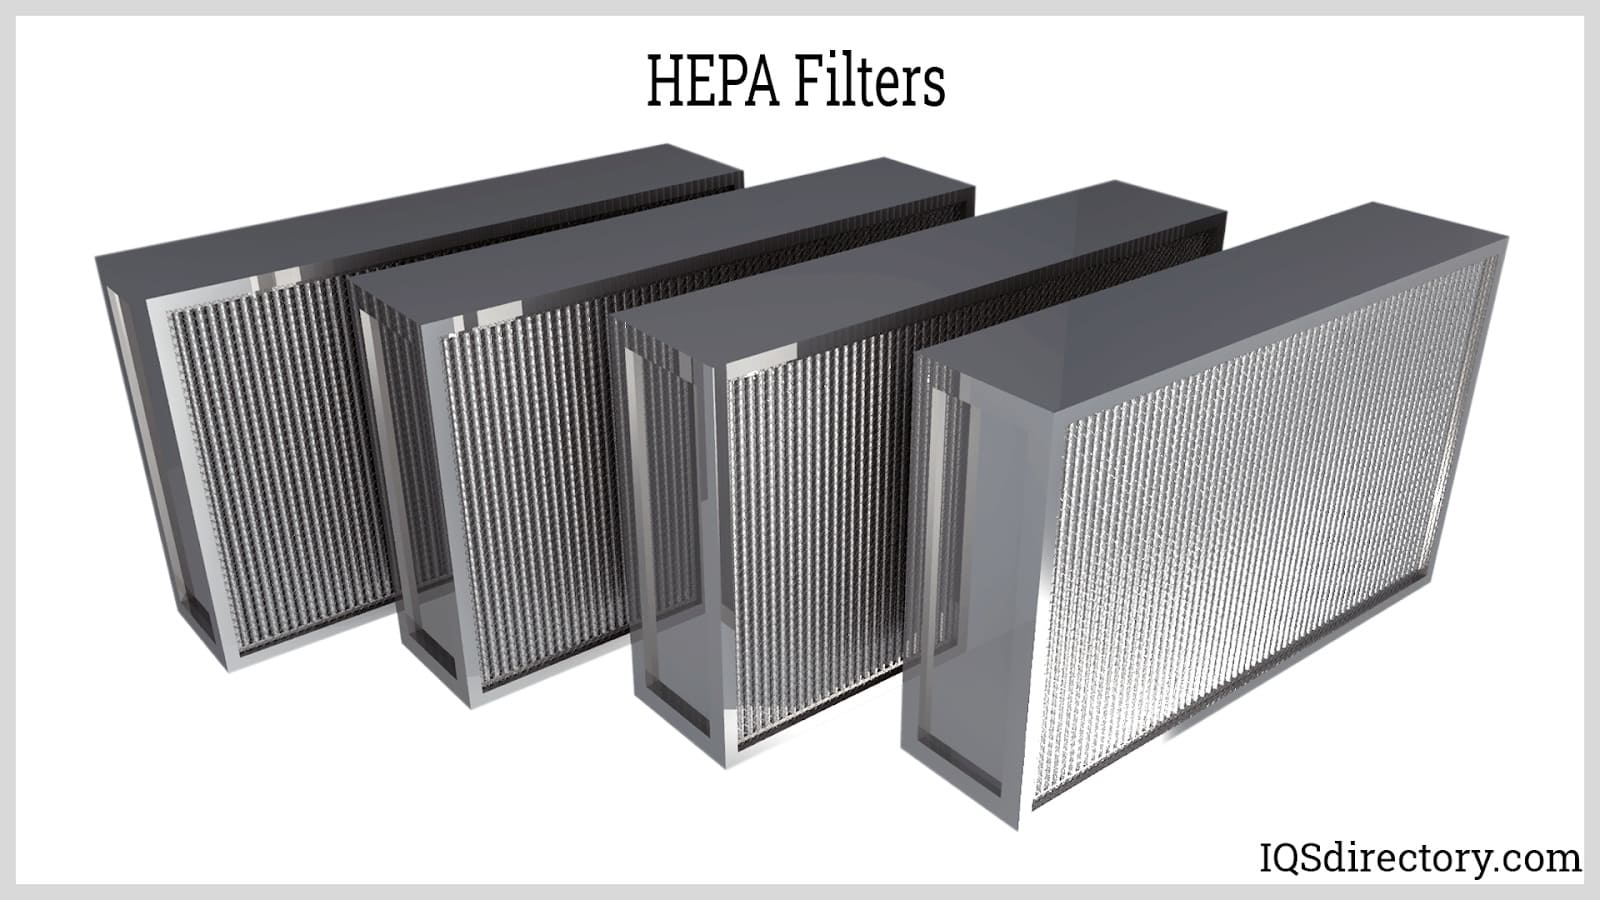 HEPA Air Filters: Classifications, Design, Uses, and Testing